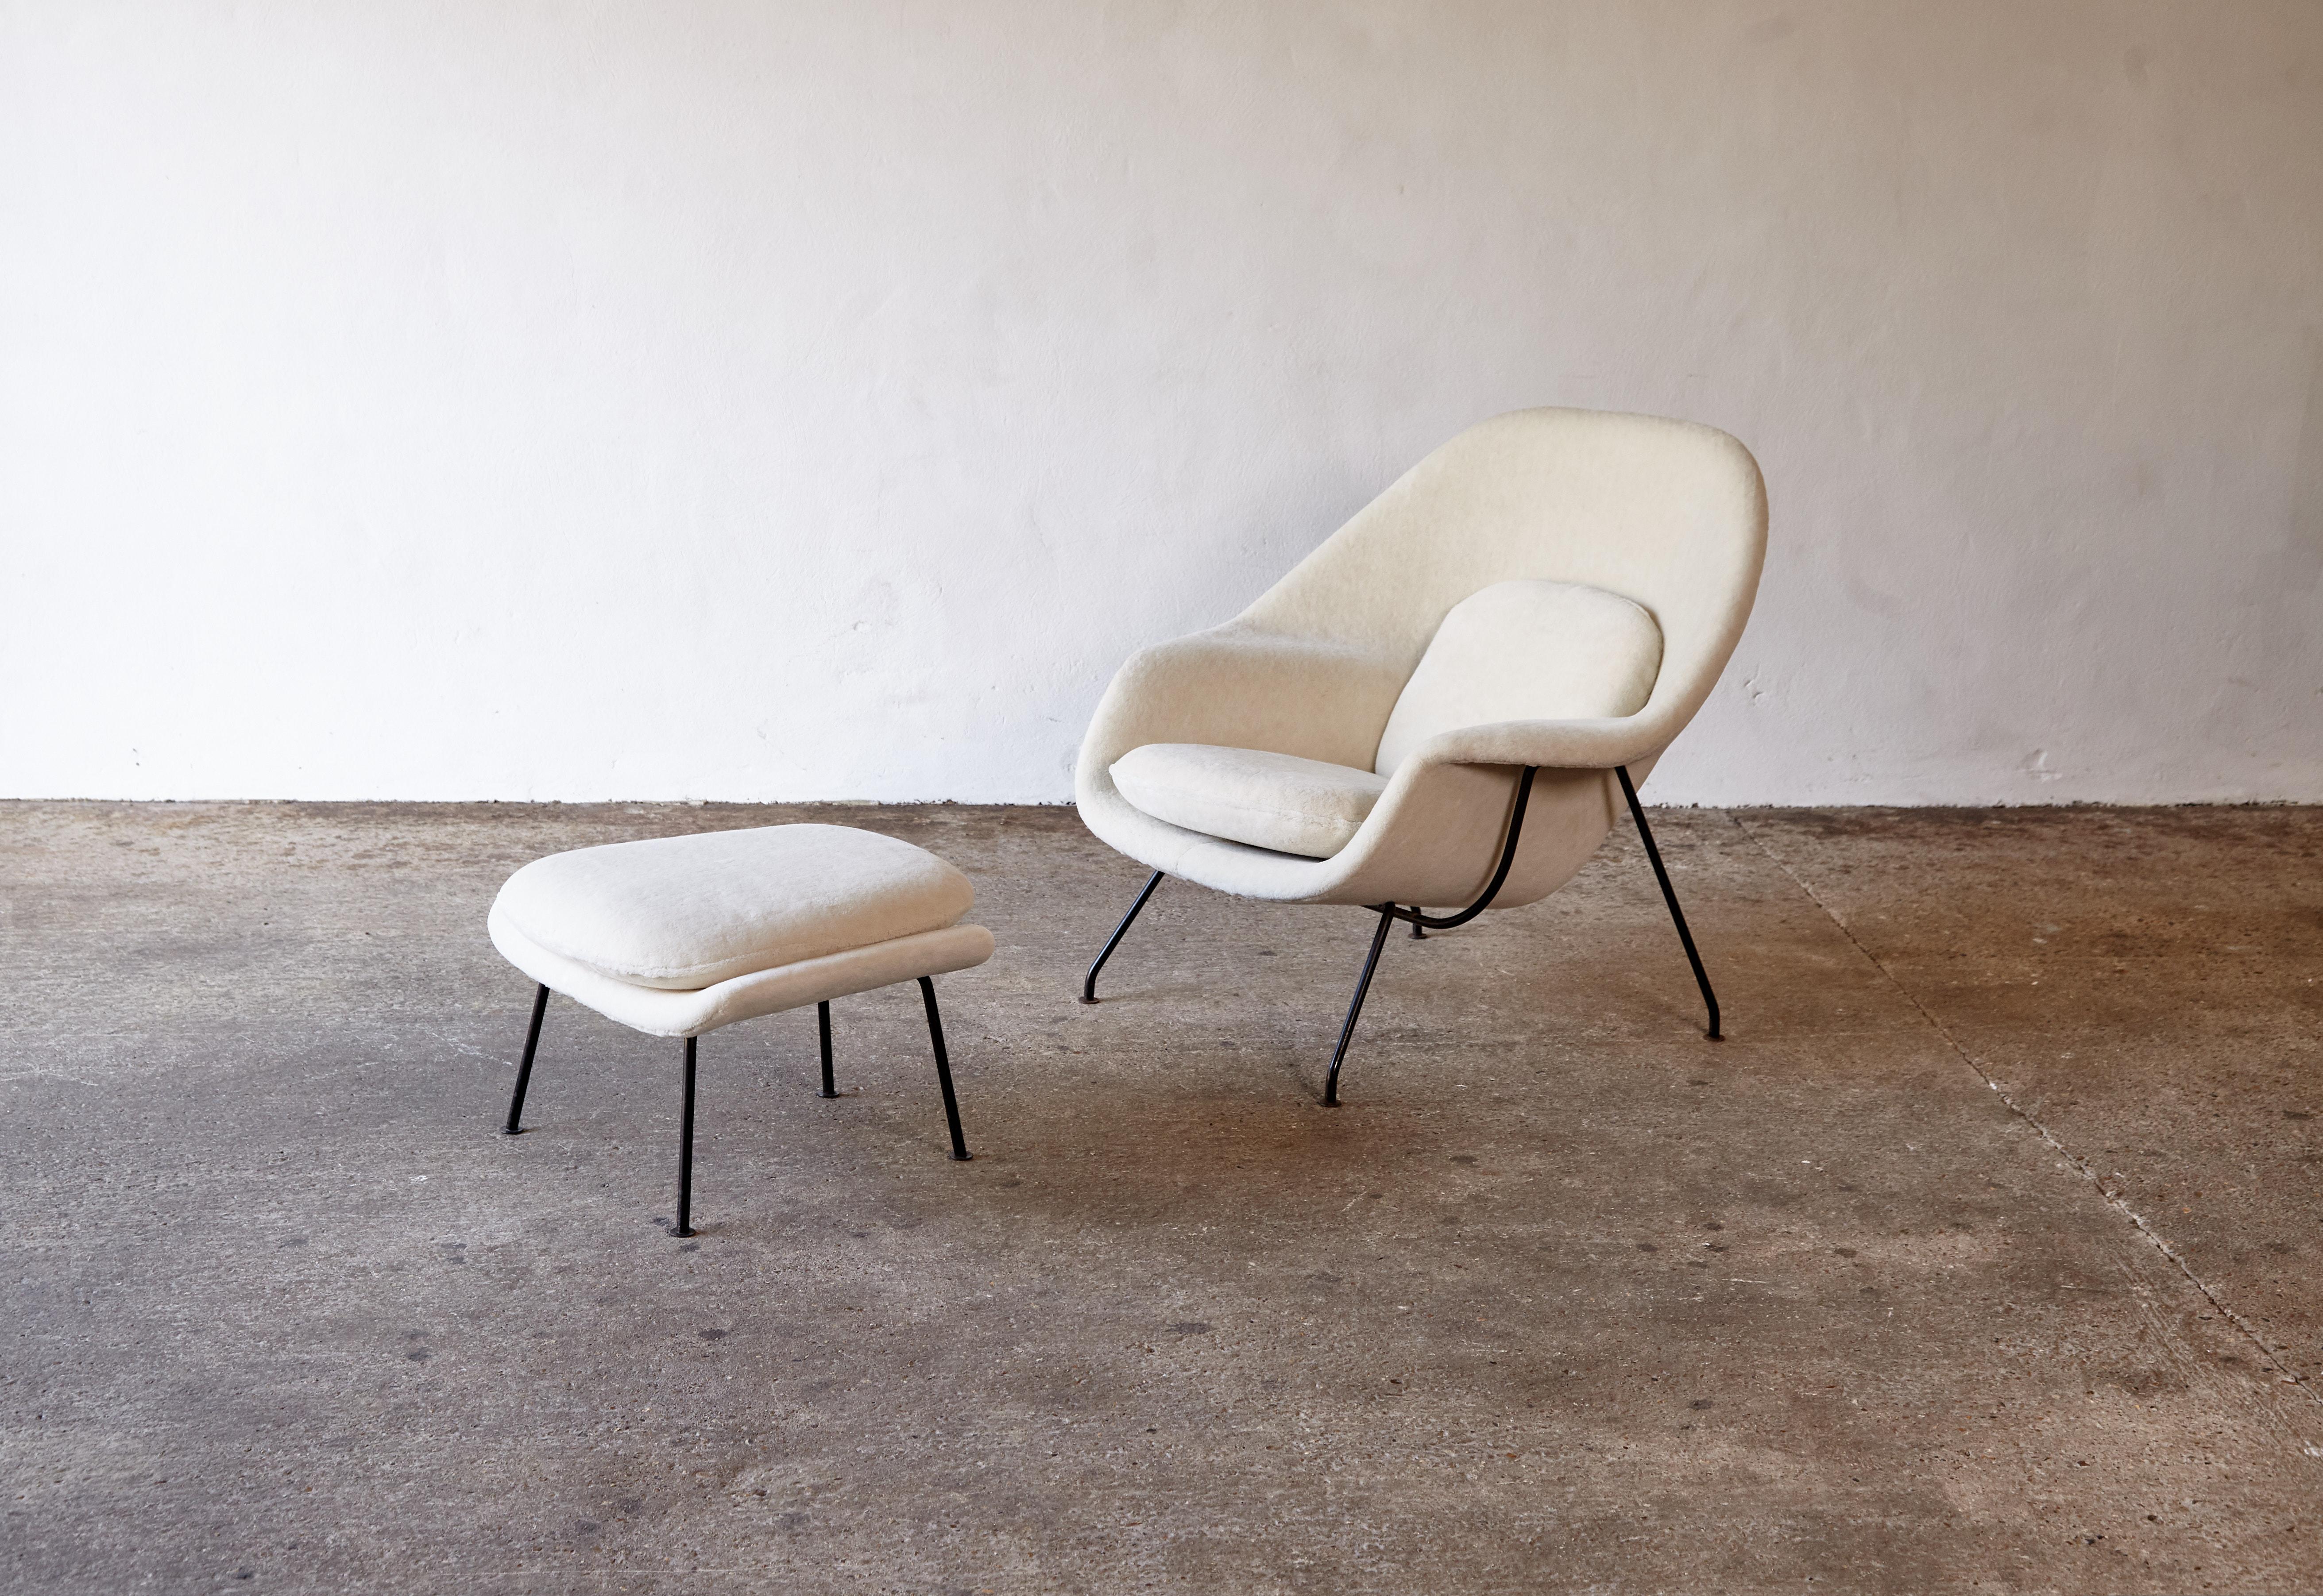 Eero Saarinen womb chair and ottoman, made by Knoll, USA, 1950s-1960s. Early production with black enameled steel frame. Newly and expertly reupholstered in Alpaca.     Fast shipping worldwide - please contact us for a competitive quote.
   